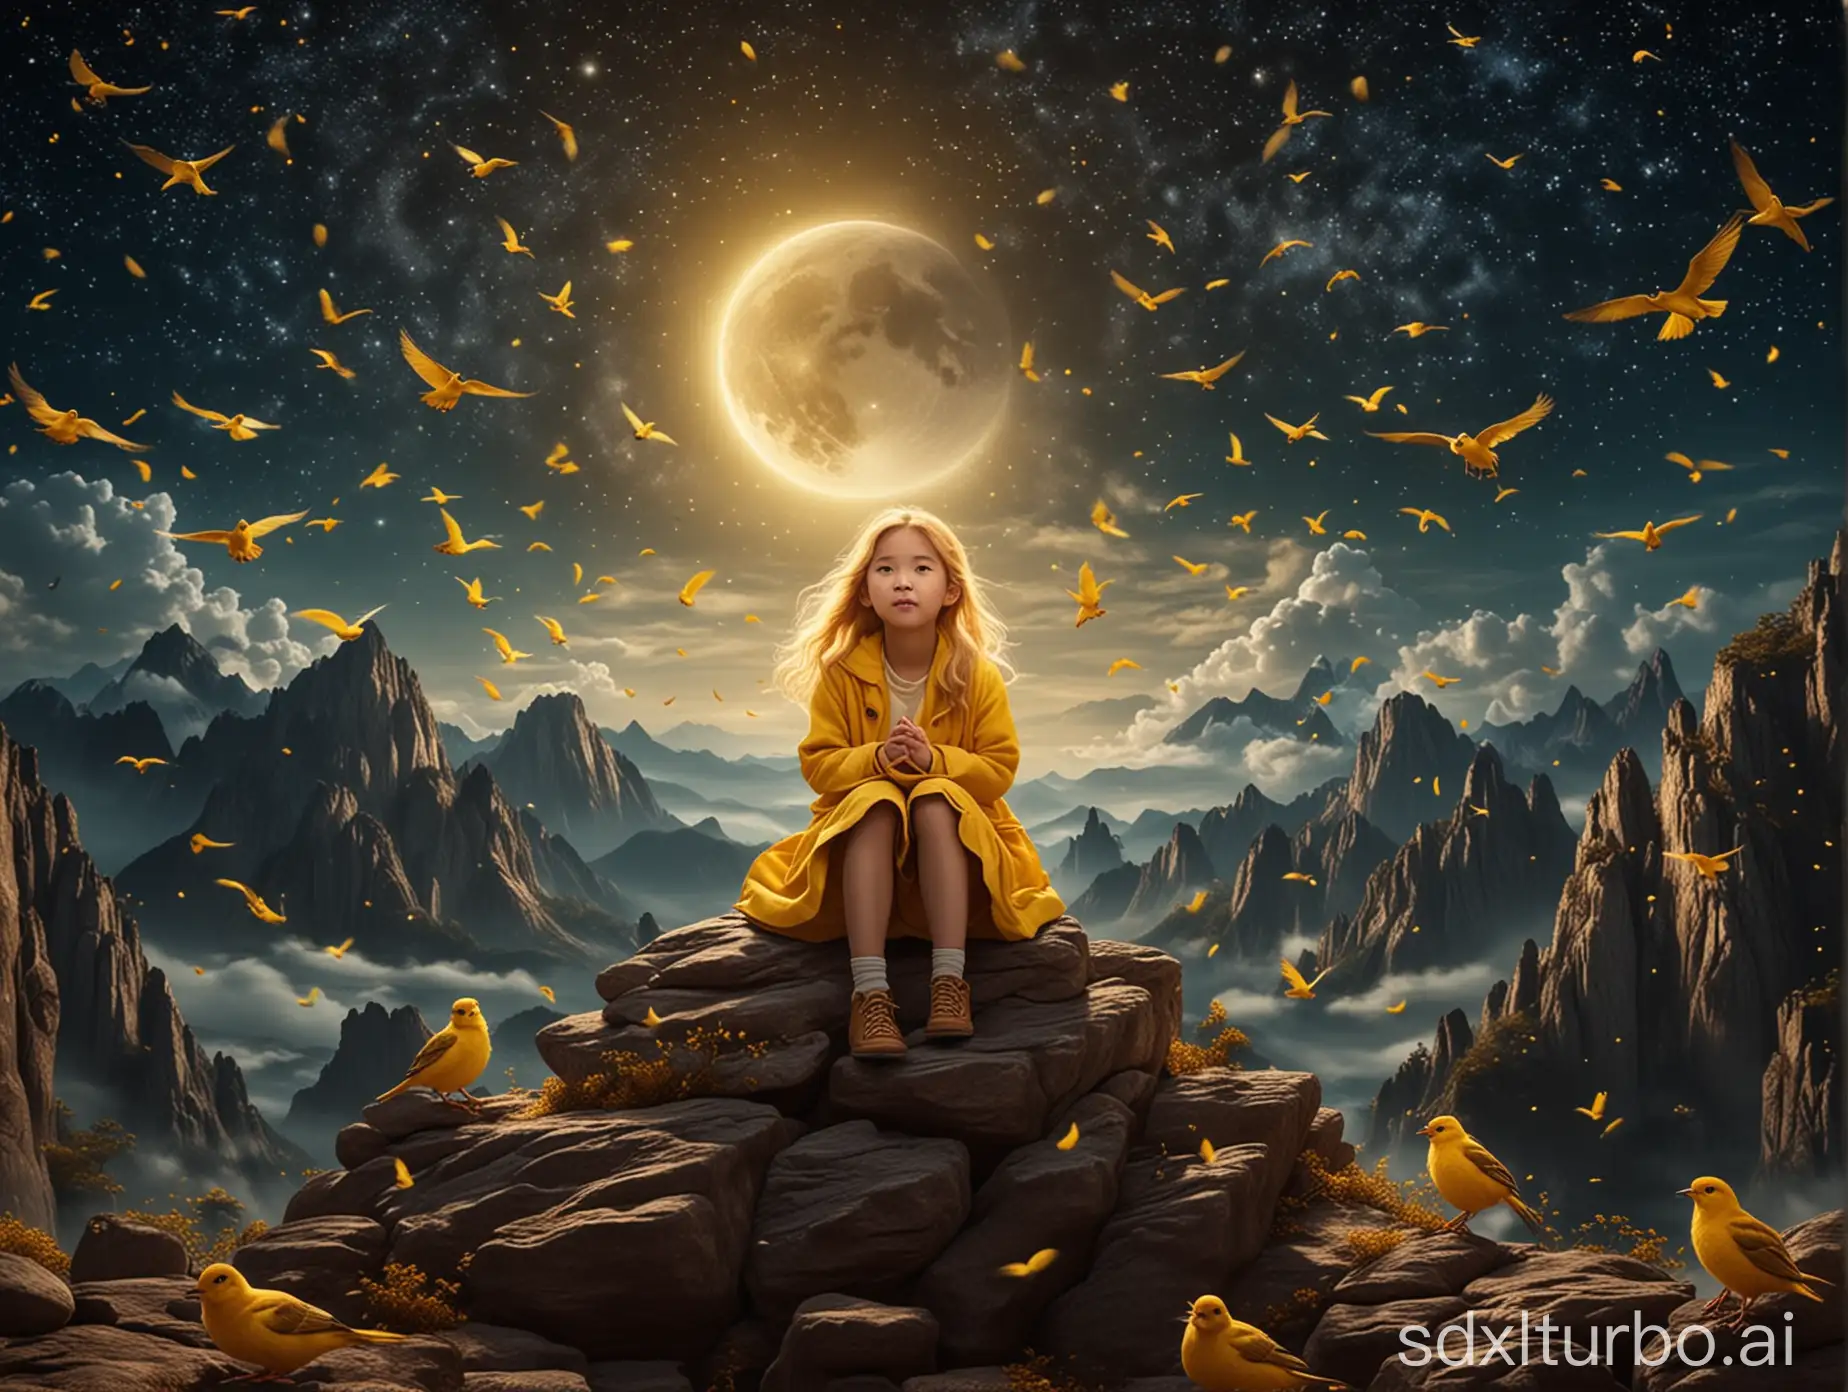 The cute Asian little girl sits on Moon Mountain, with golden hair, surrounded by flying yellow birds, starry sky, movie effects, children's commercial blockbuster.